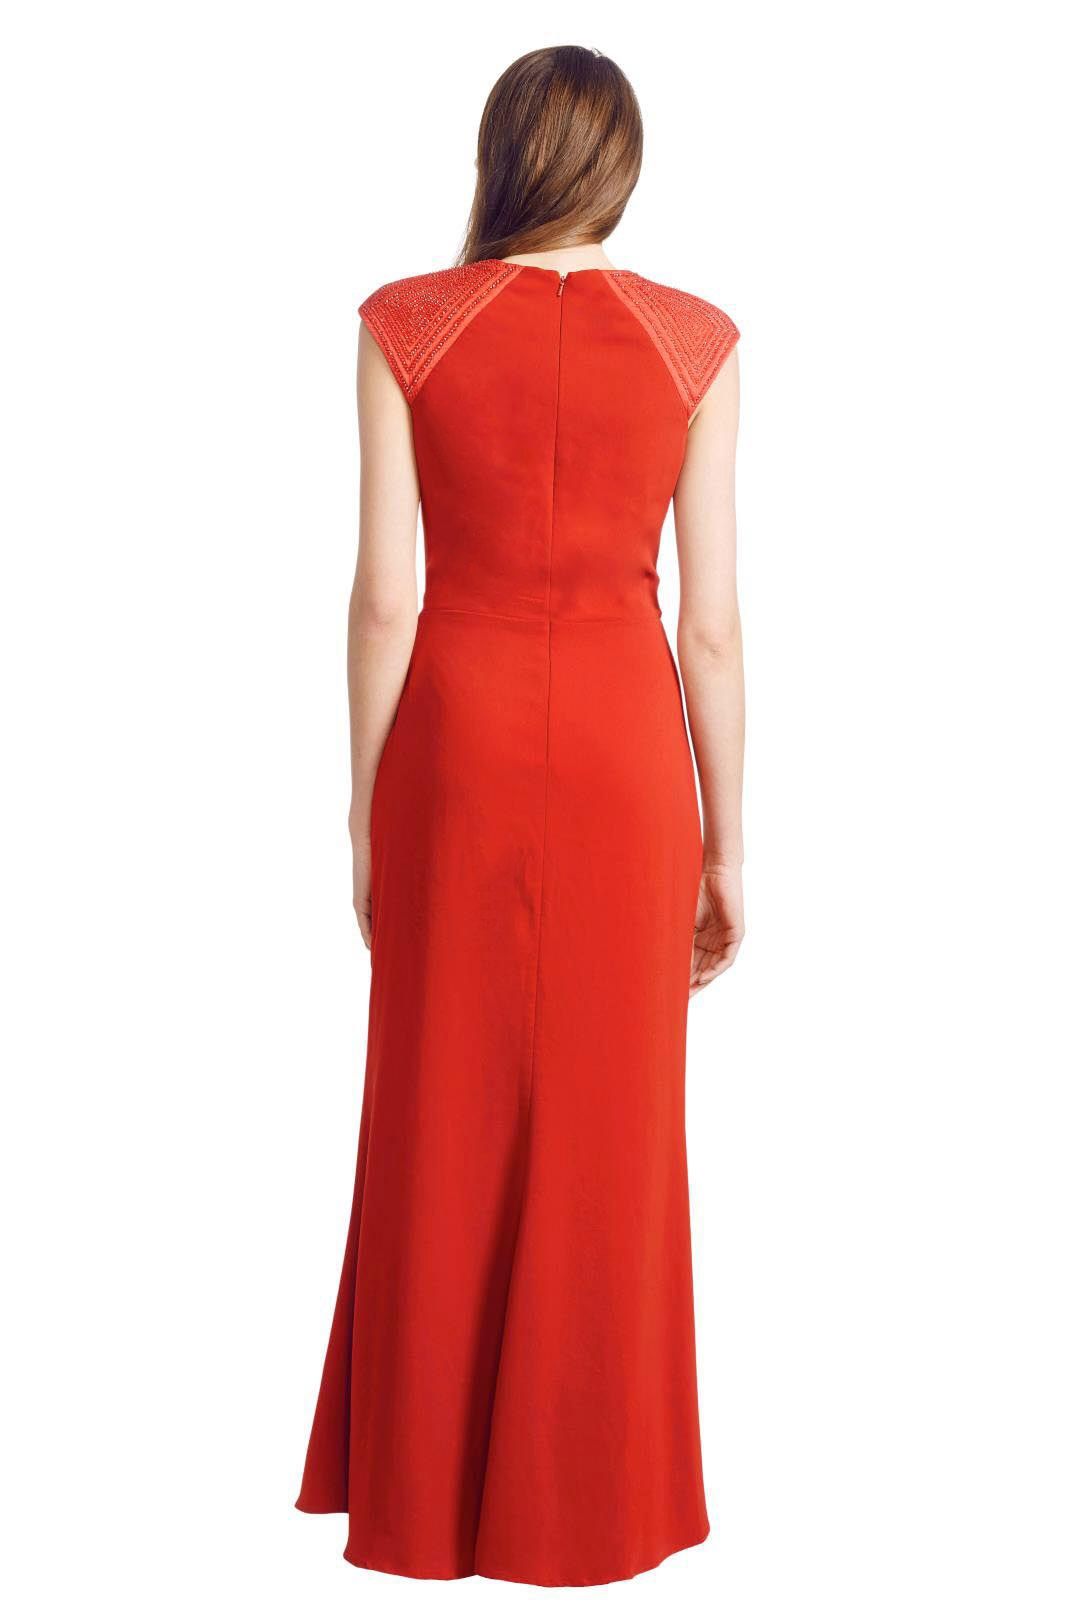 Badgley Mischka - Bedazzled Gown - Red - Back